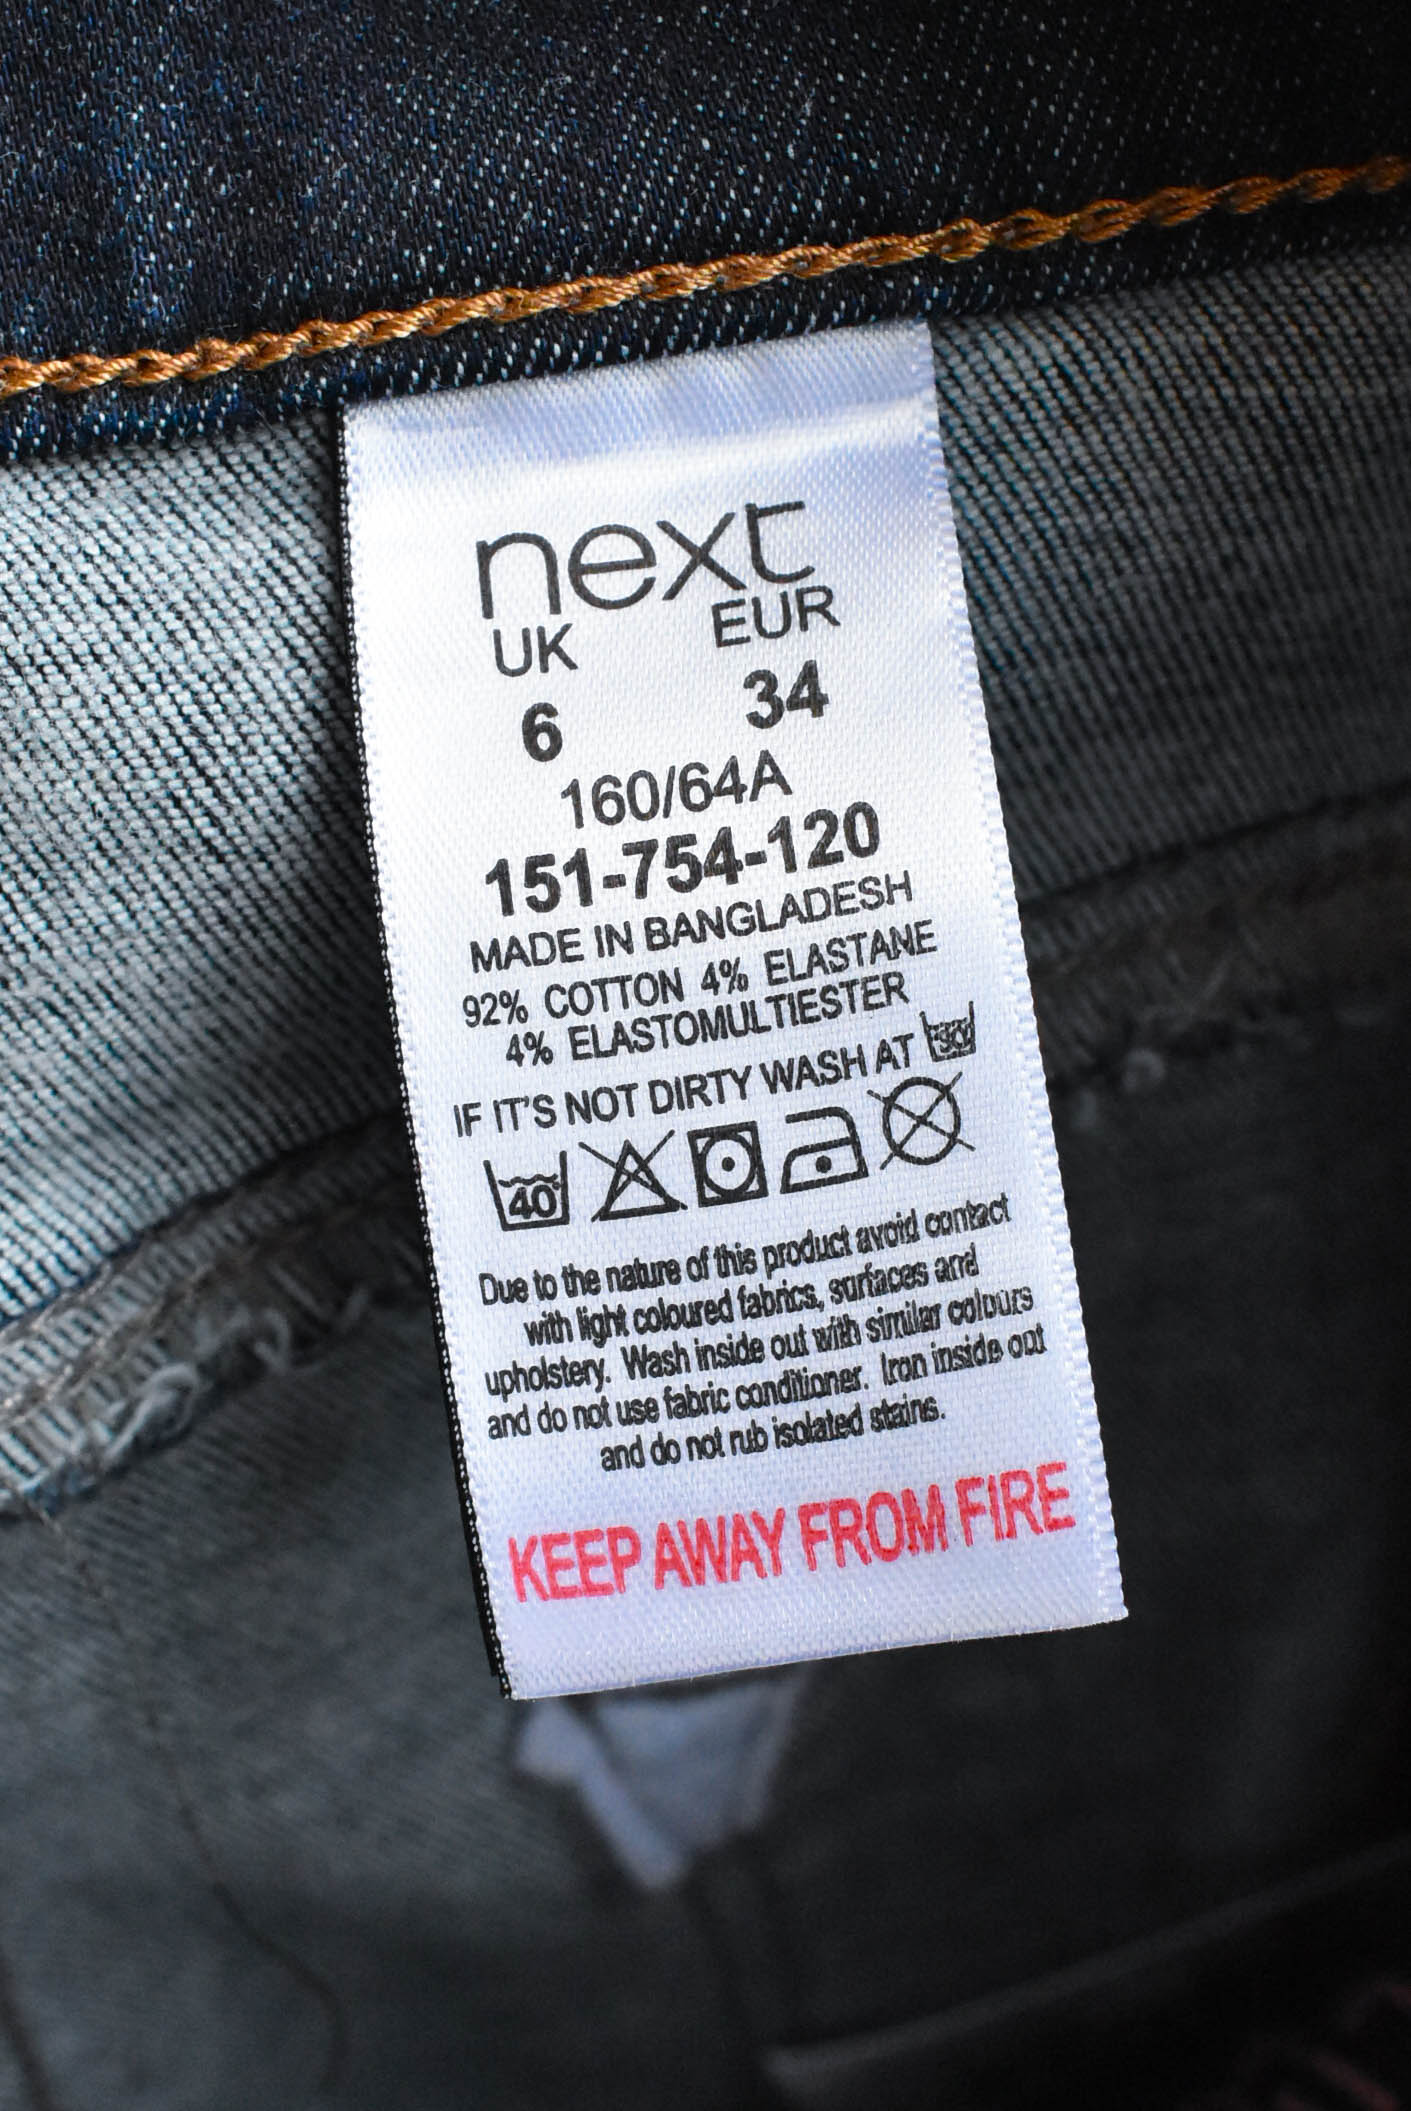 NEW Next Jeans Petite slim high rise jeans, size 6